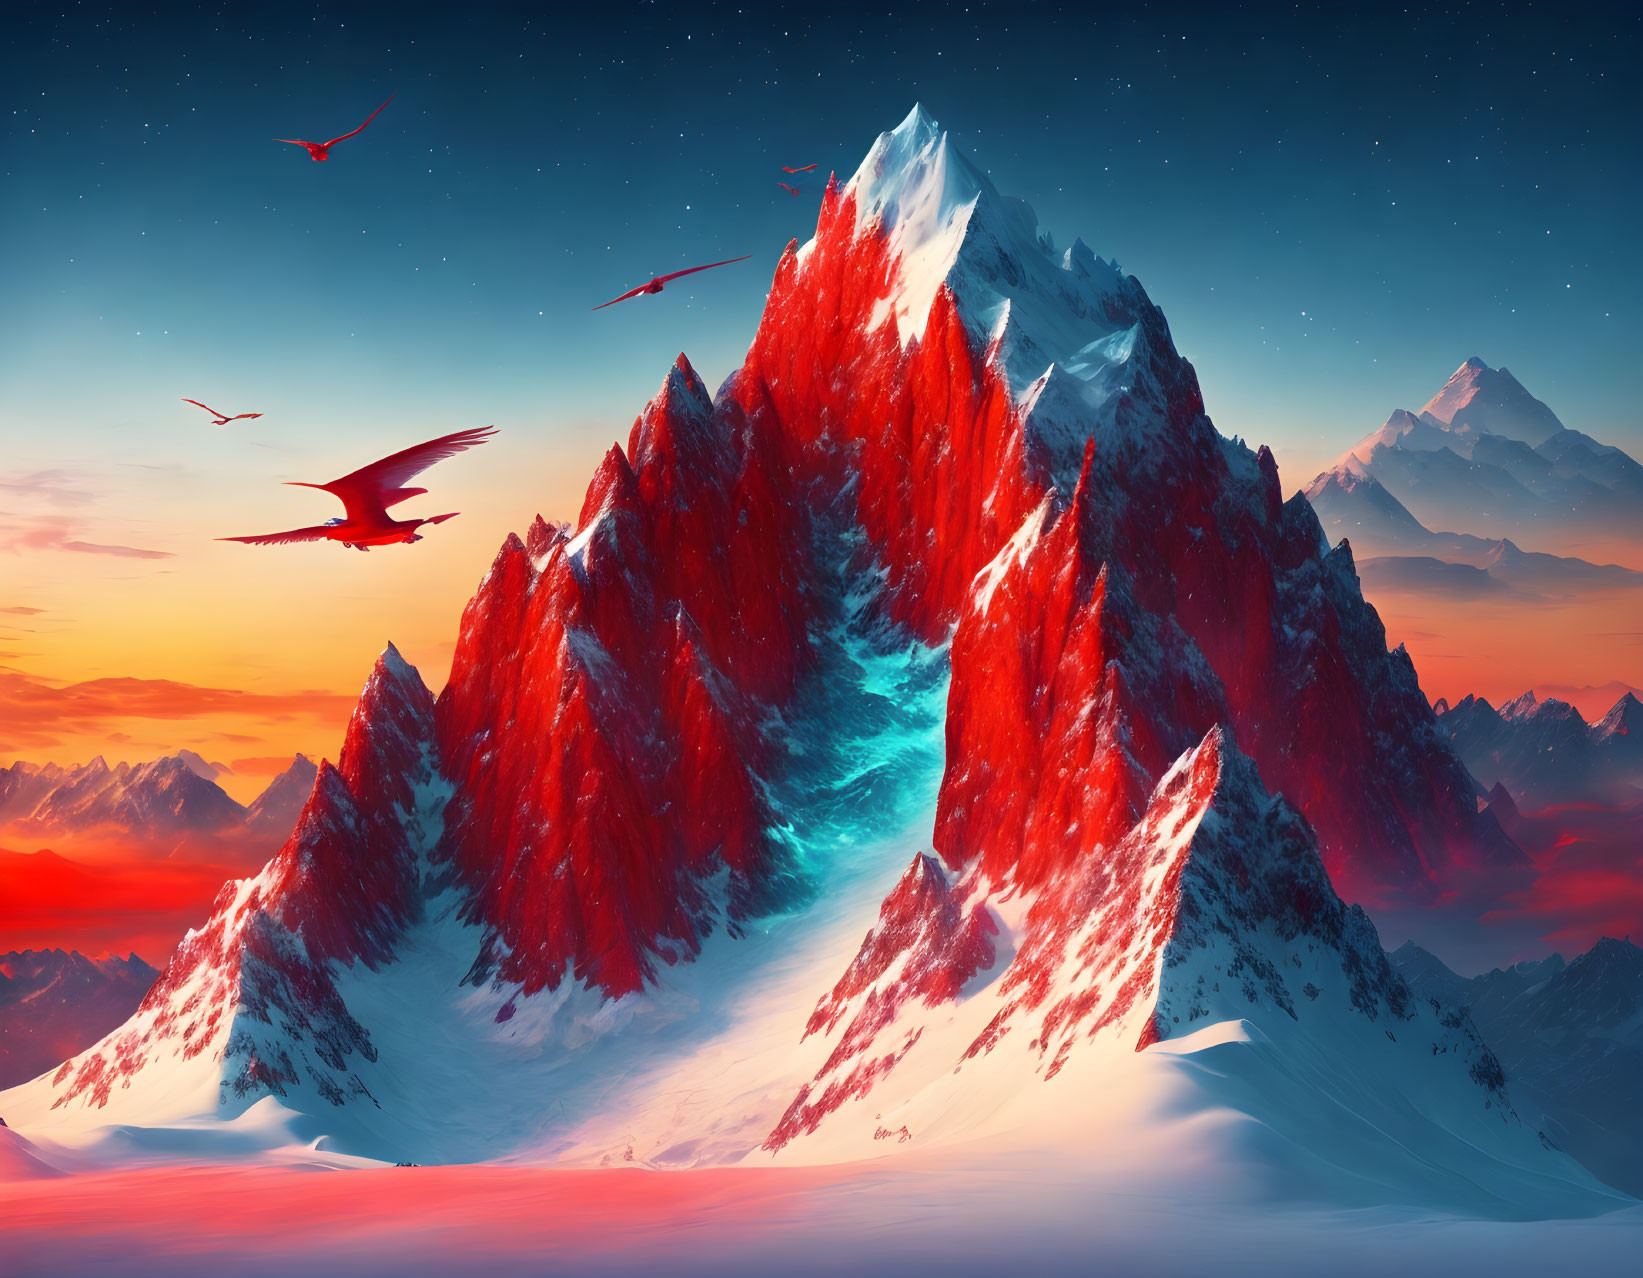 Majestic red and blue mountains under starry sky with eagles and ocean of clouds at dusk